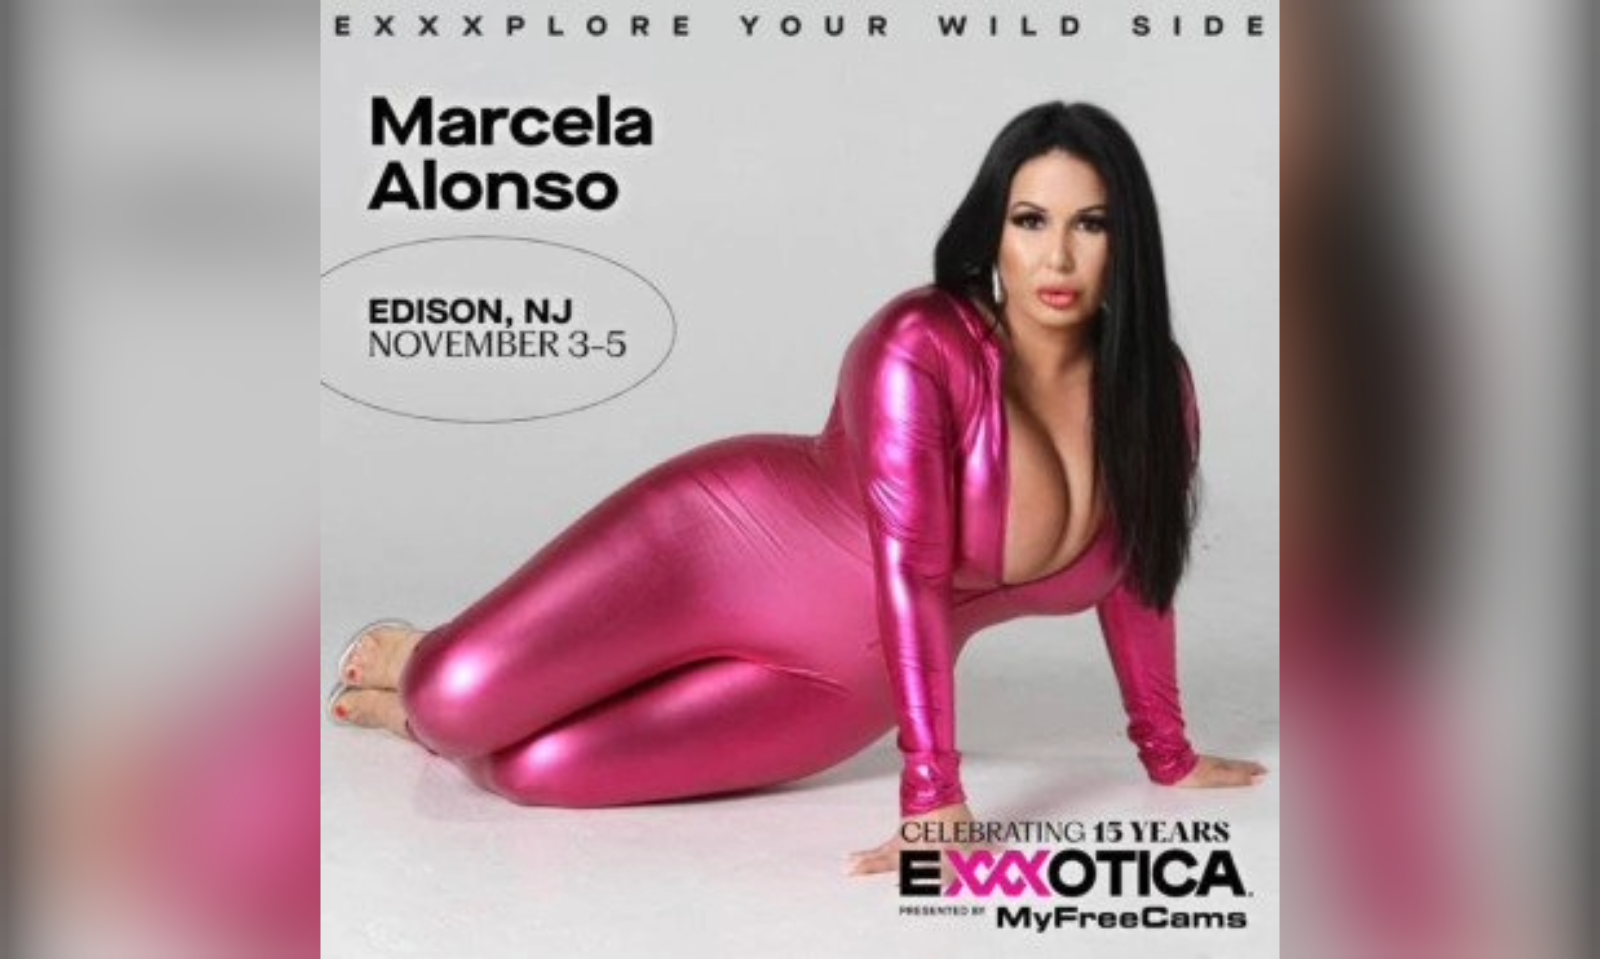 Marcela Alonso to Appear at Exxxotica New Jersey